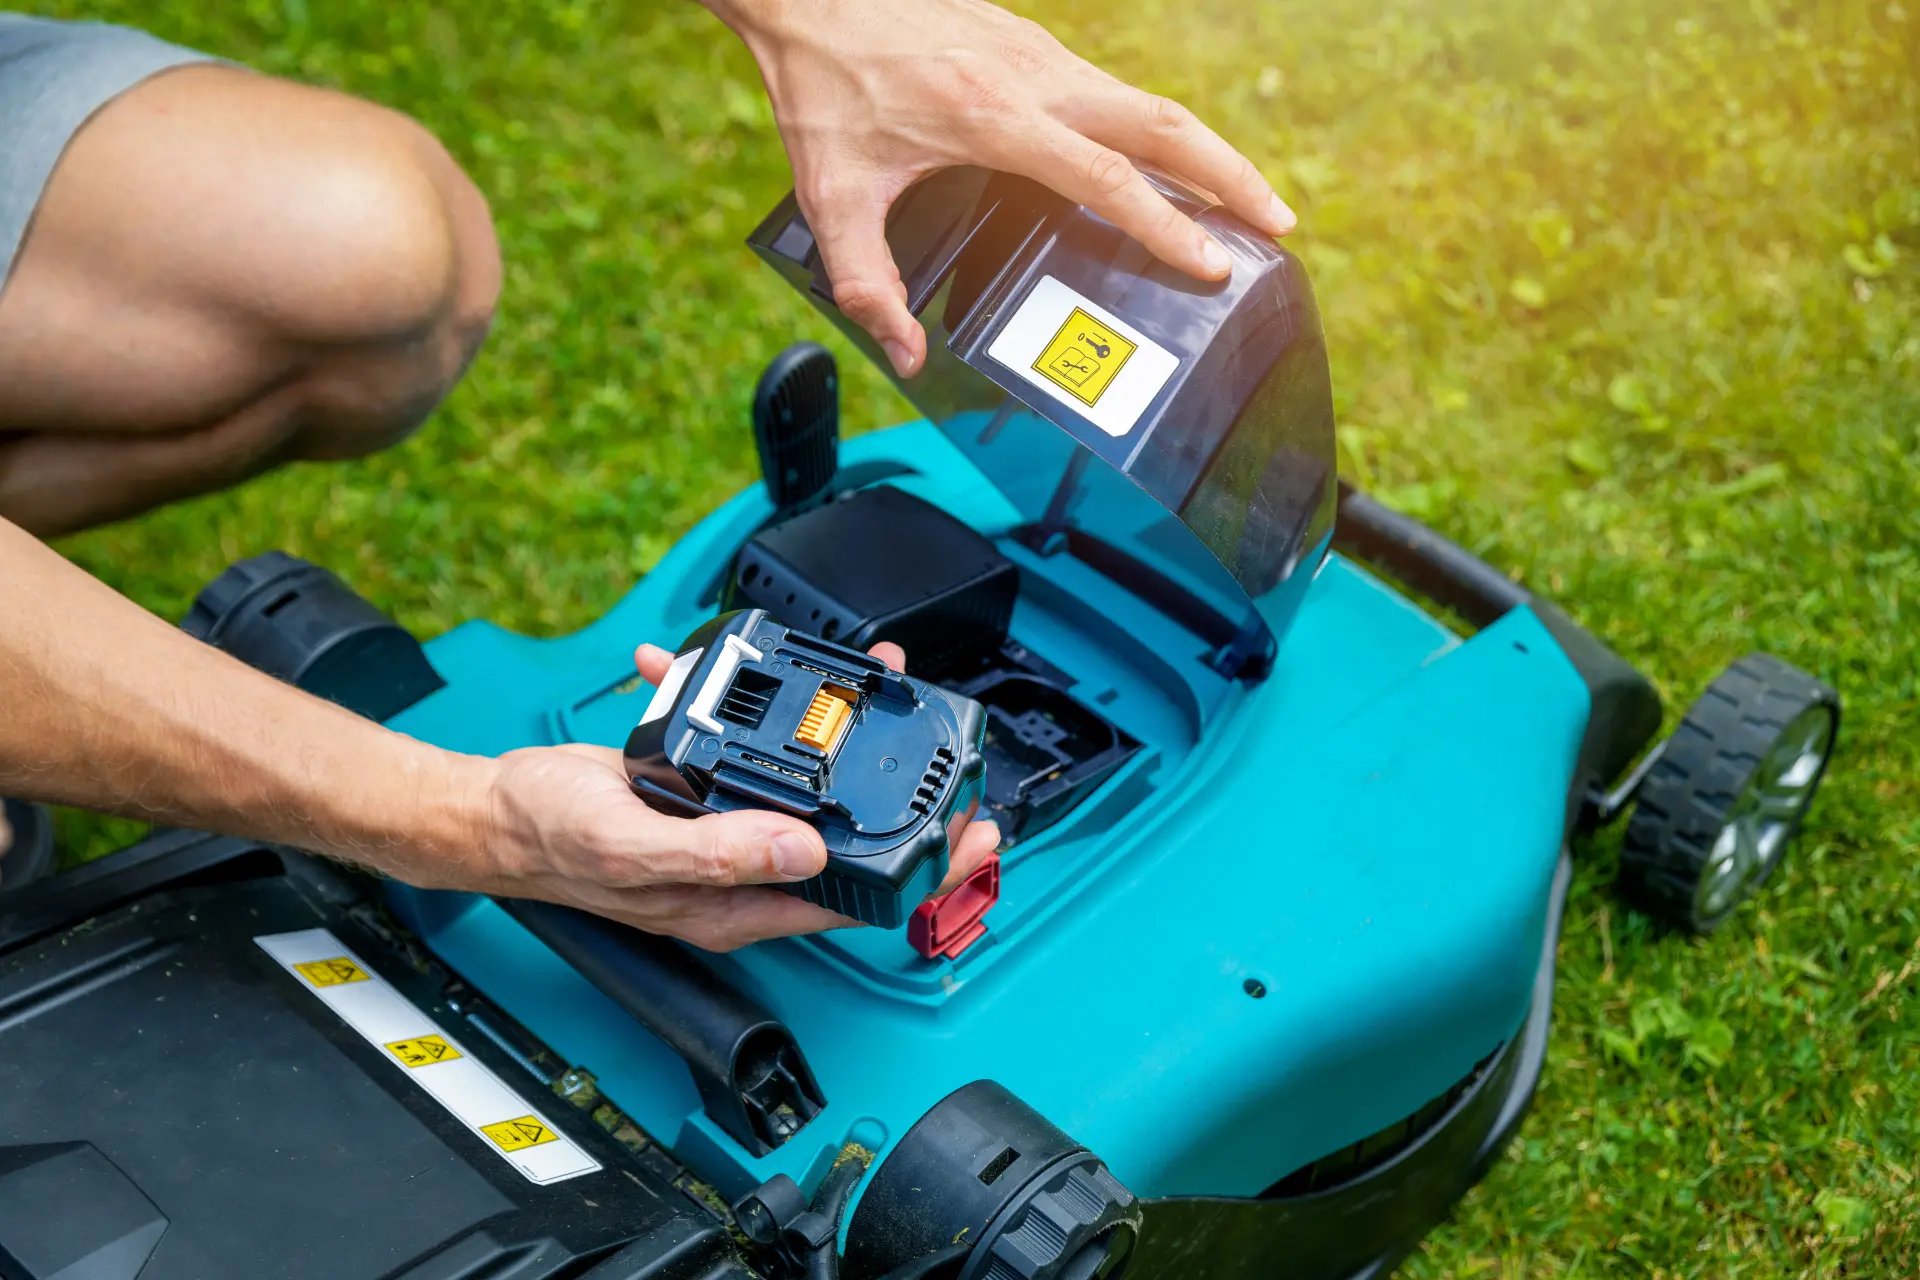 Lawn Mower Battery Pack being replaced